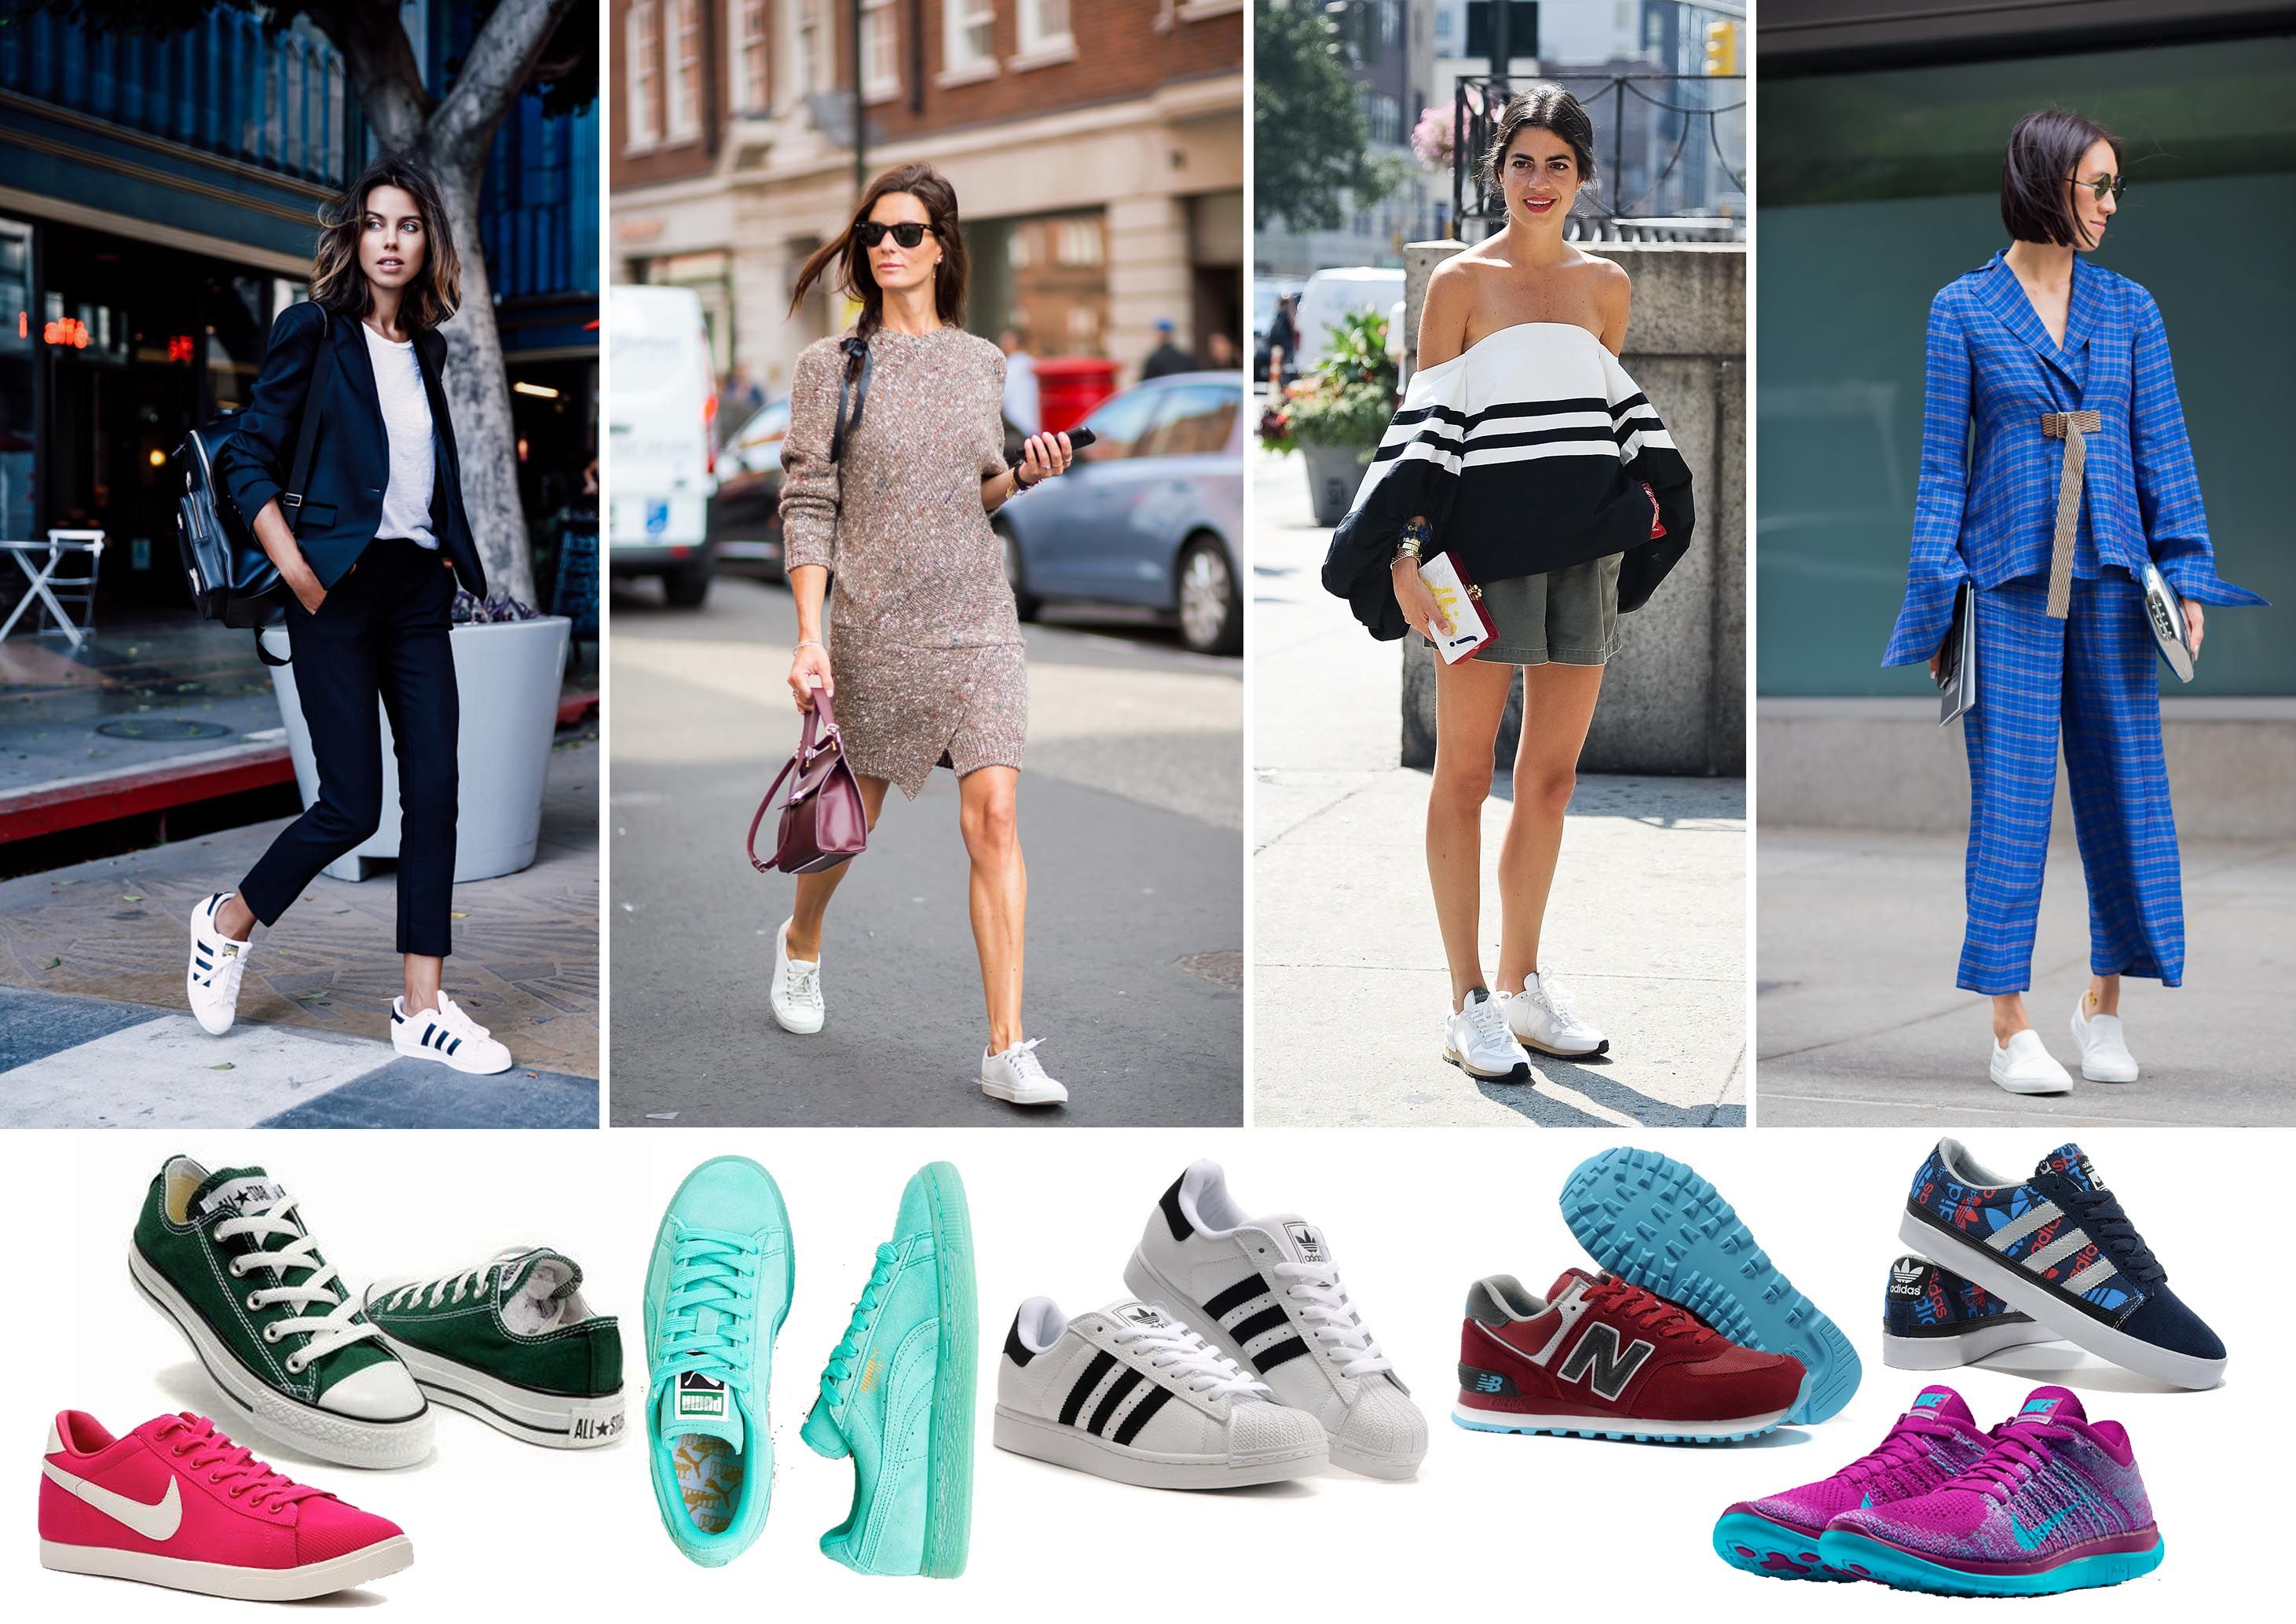 Trending: Sneakers and Loafers, the Latest Trends and Hype among Fashionistas